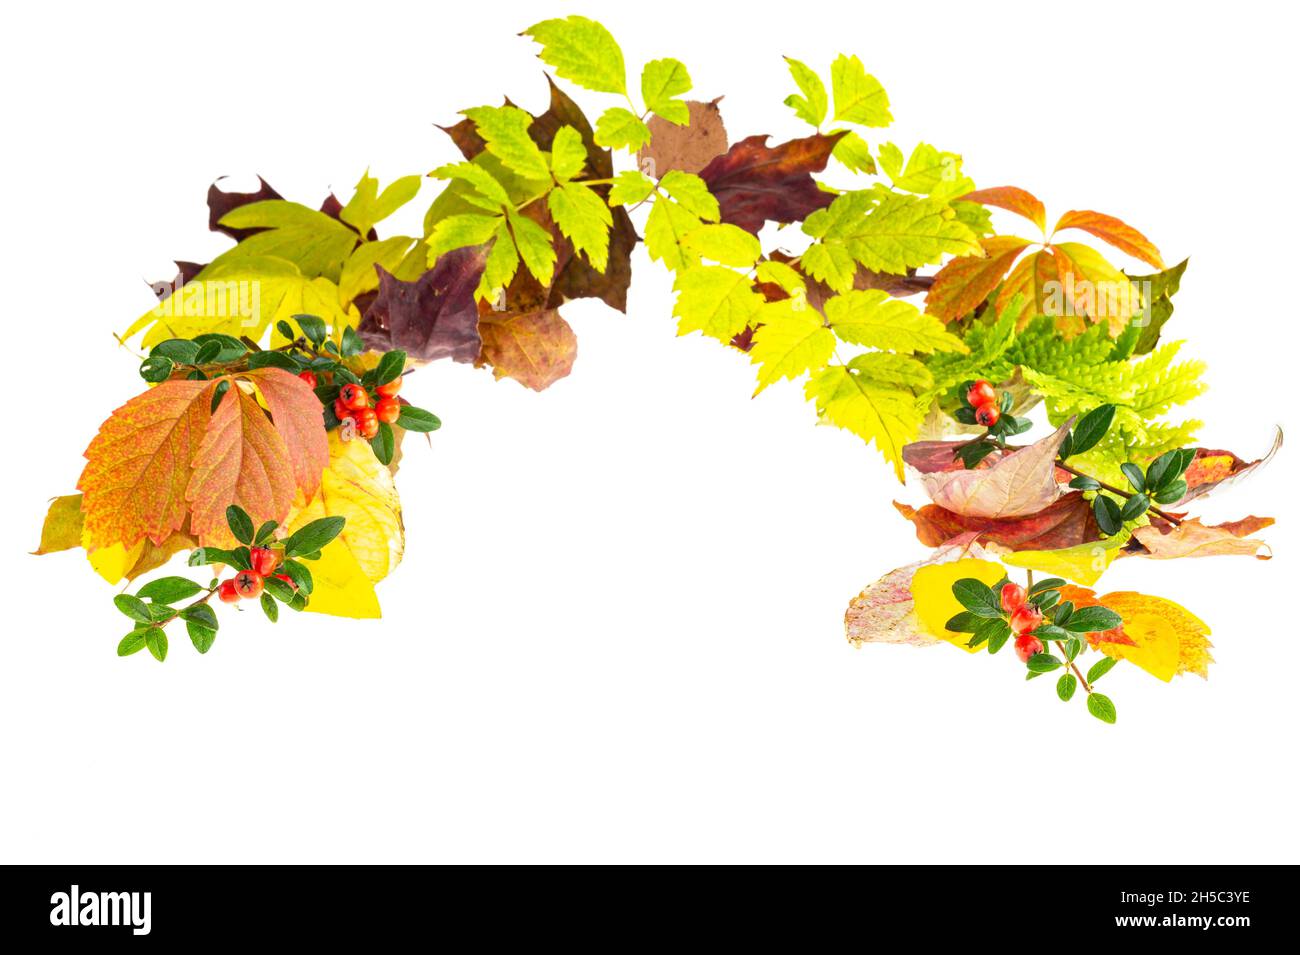 Colorful fresh real autumn leaves from different plants lie in a semicircle. White background without shadows. Stock Photo